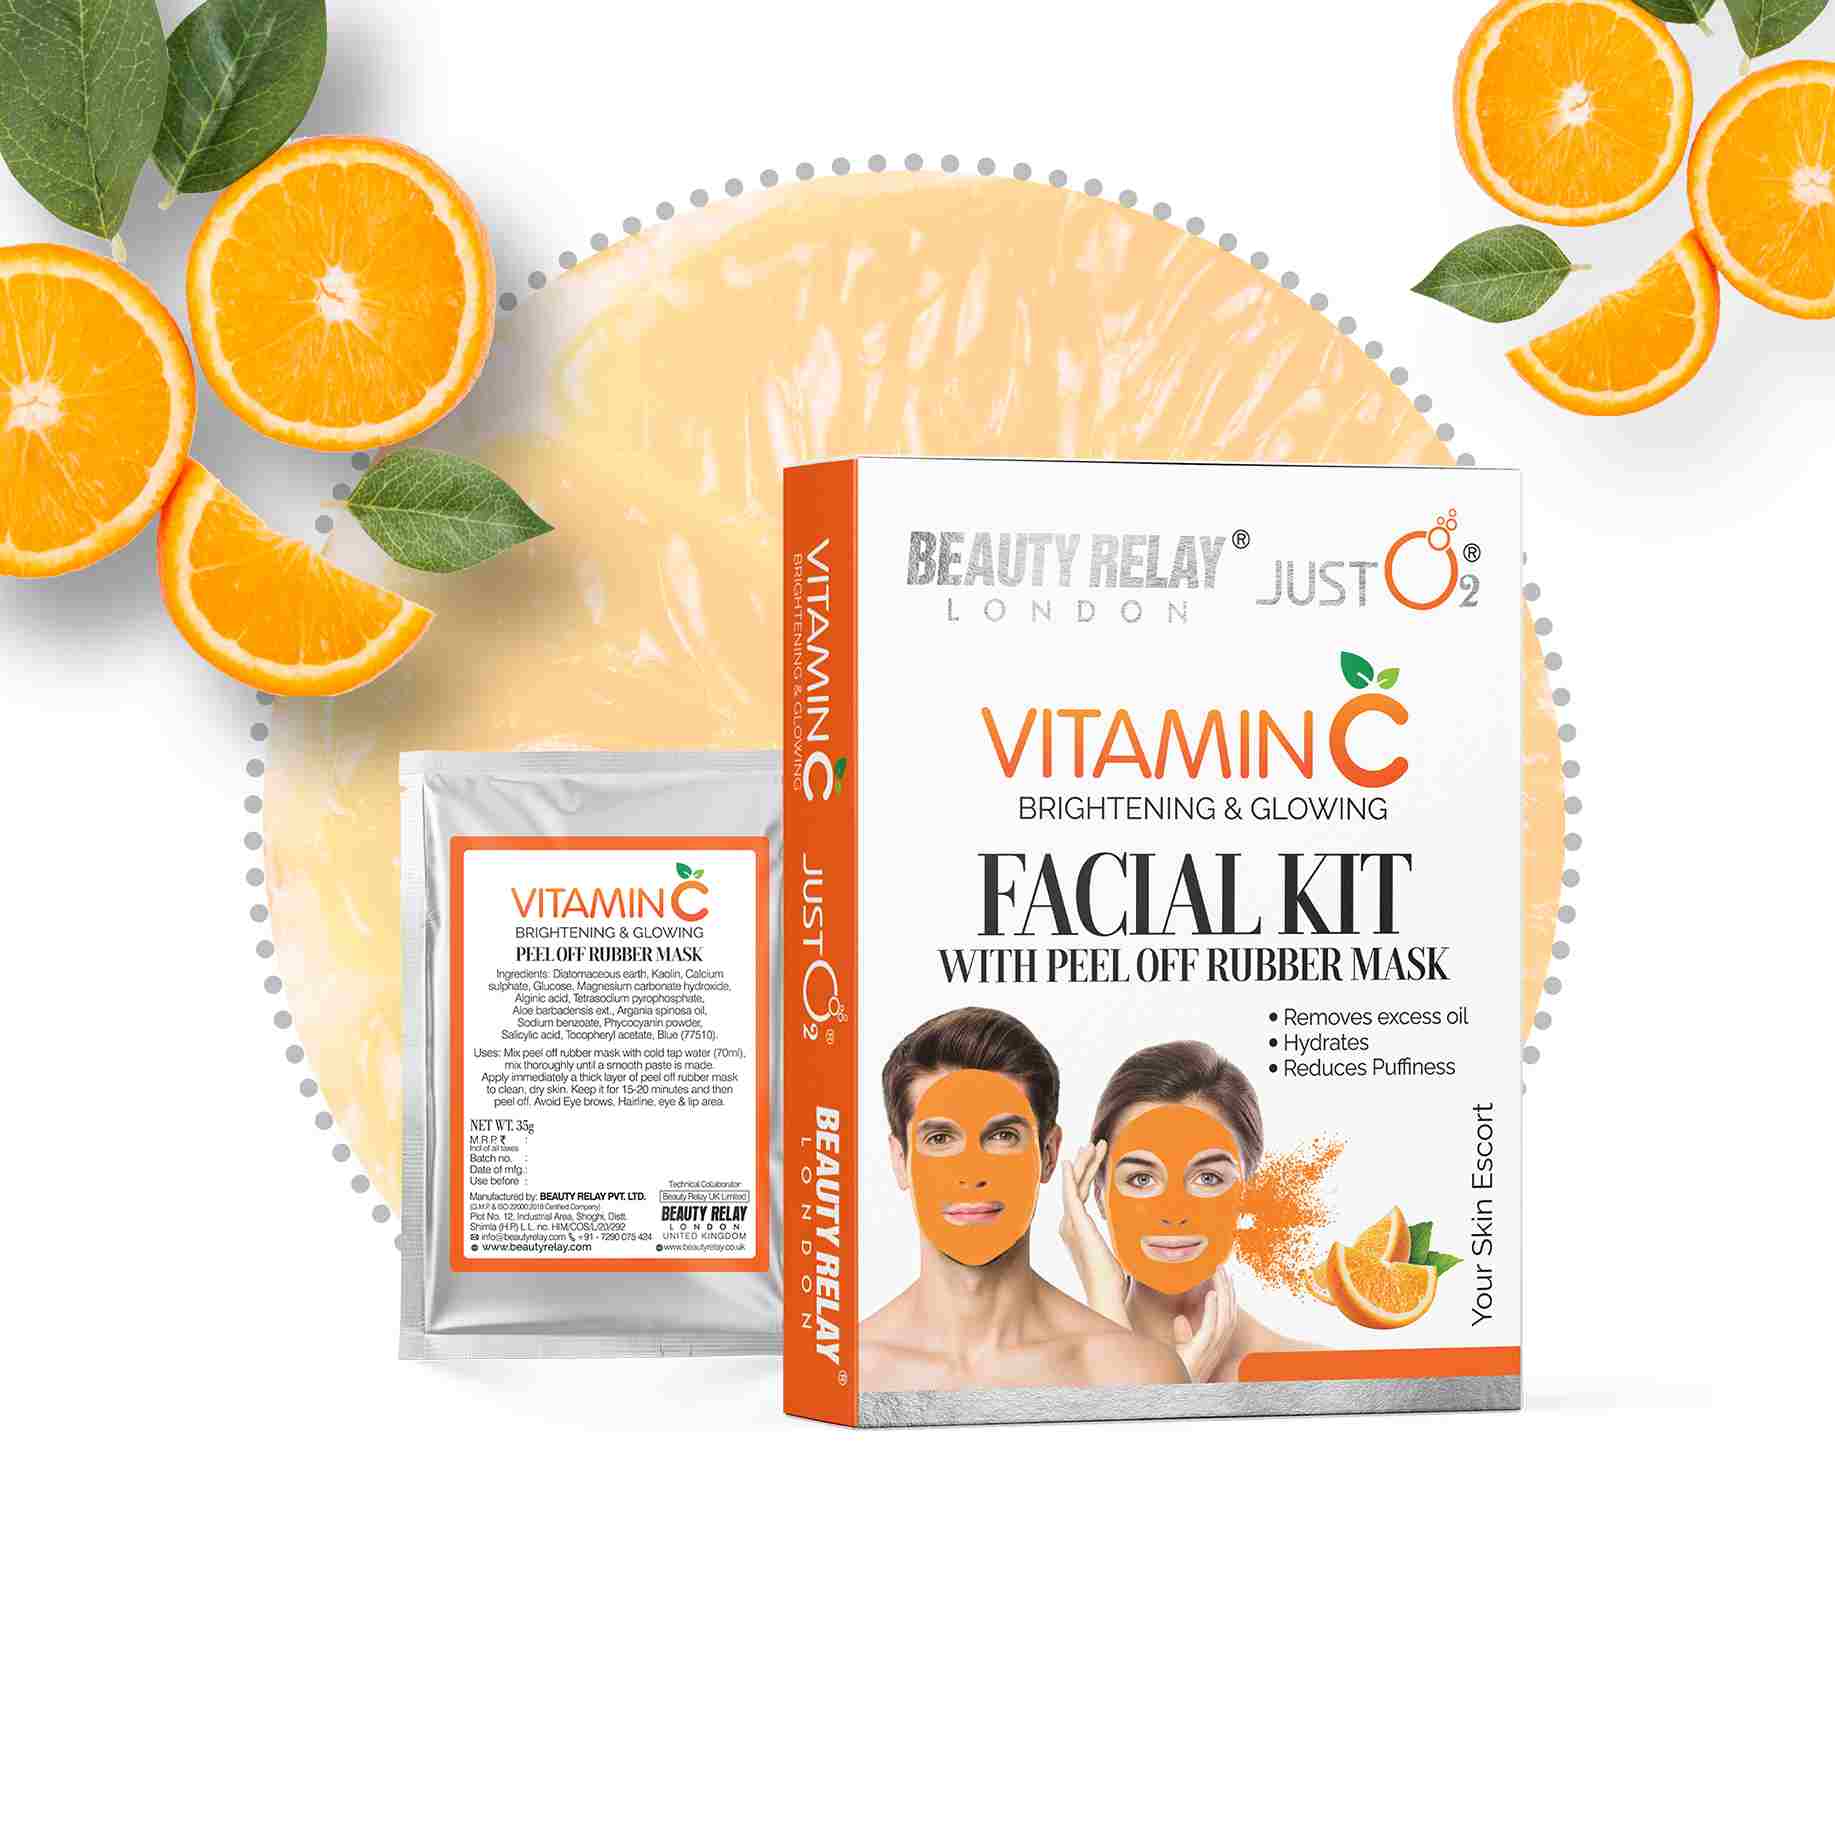 Vitamin C Facial Kit with Peel-off Rubber Mask